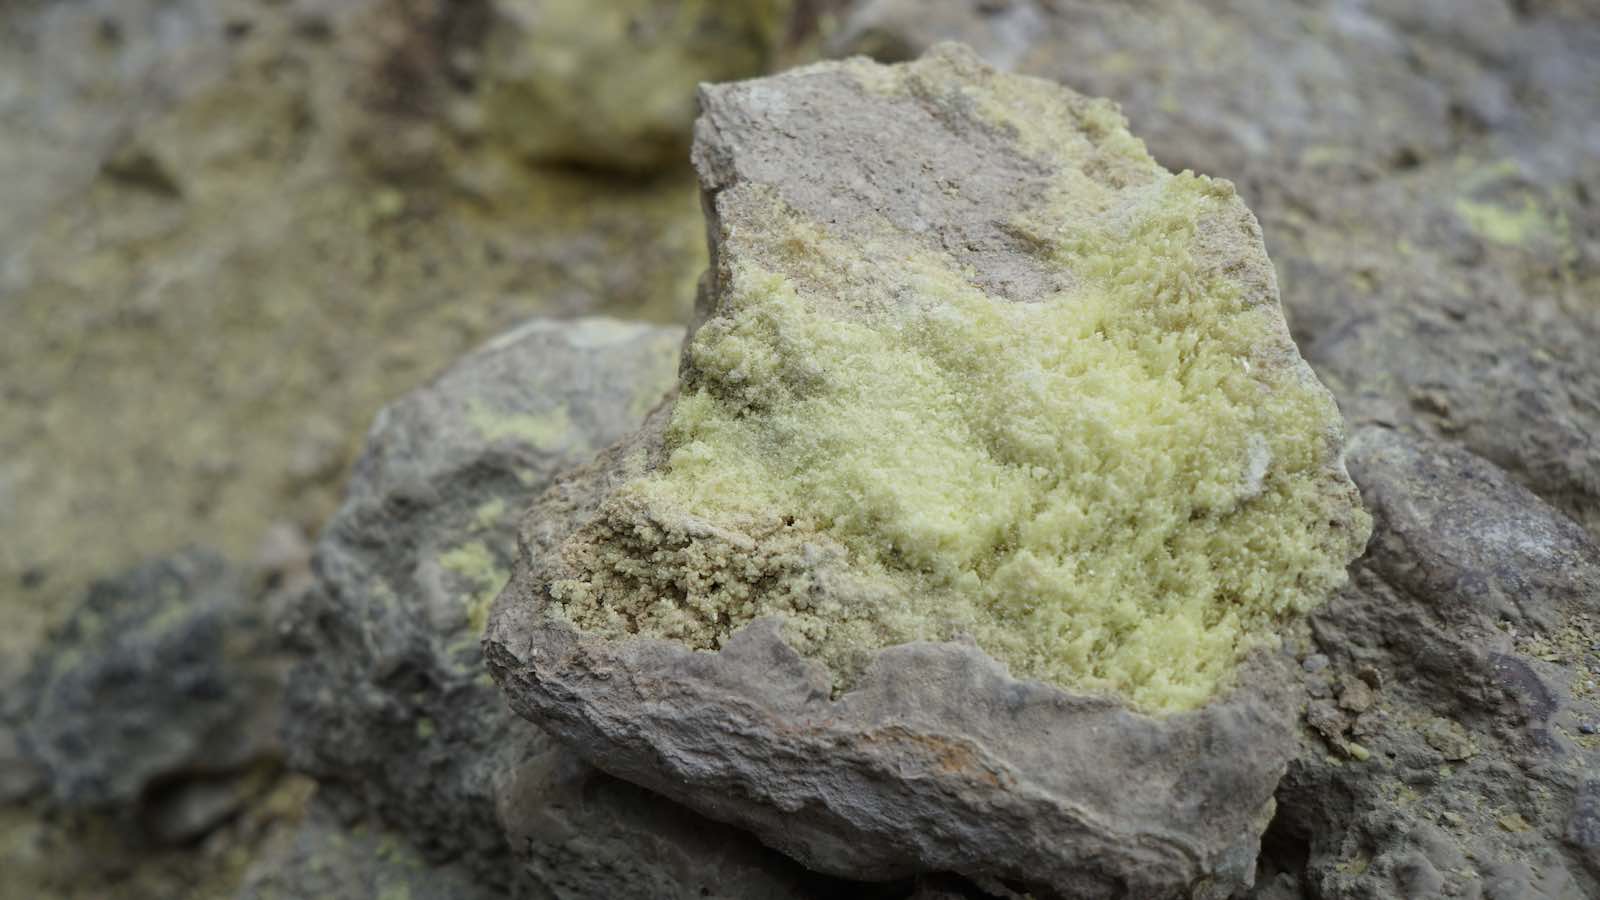 Sulfur deposits like this everywhere (and with it unfortunately came the smell of rotten eggs)